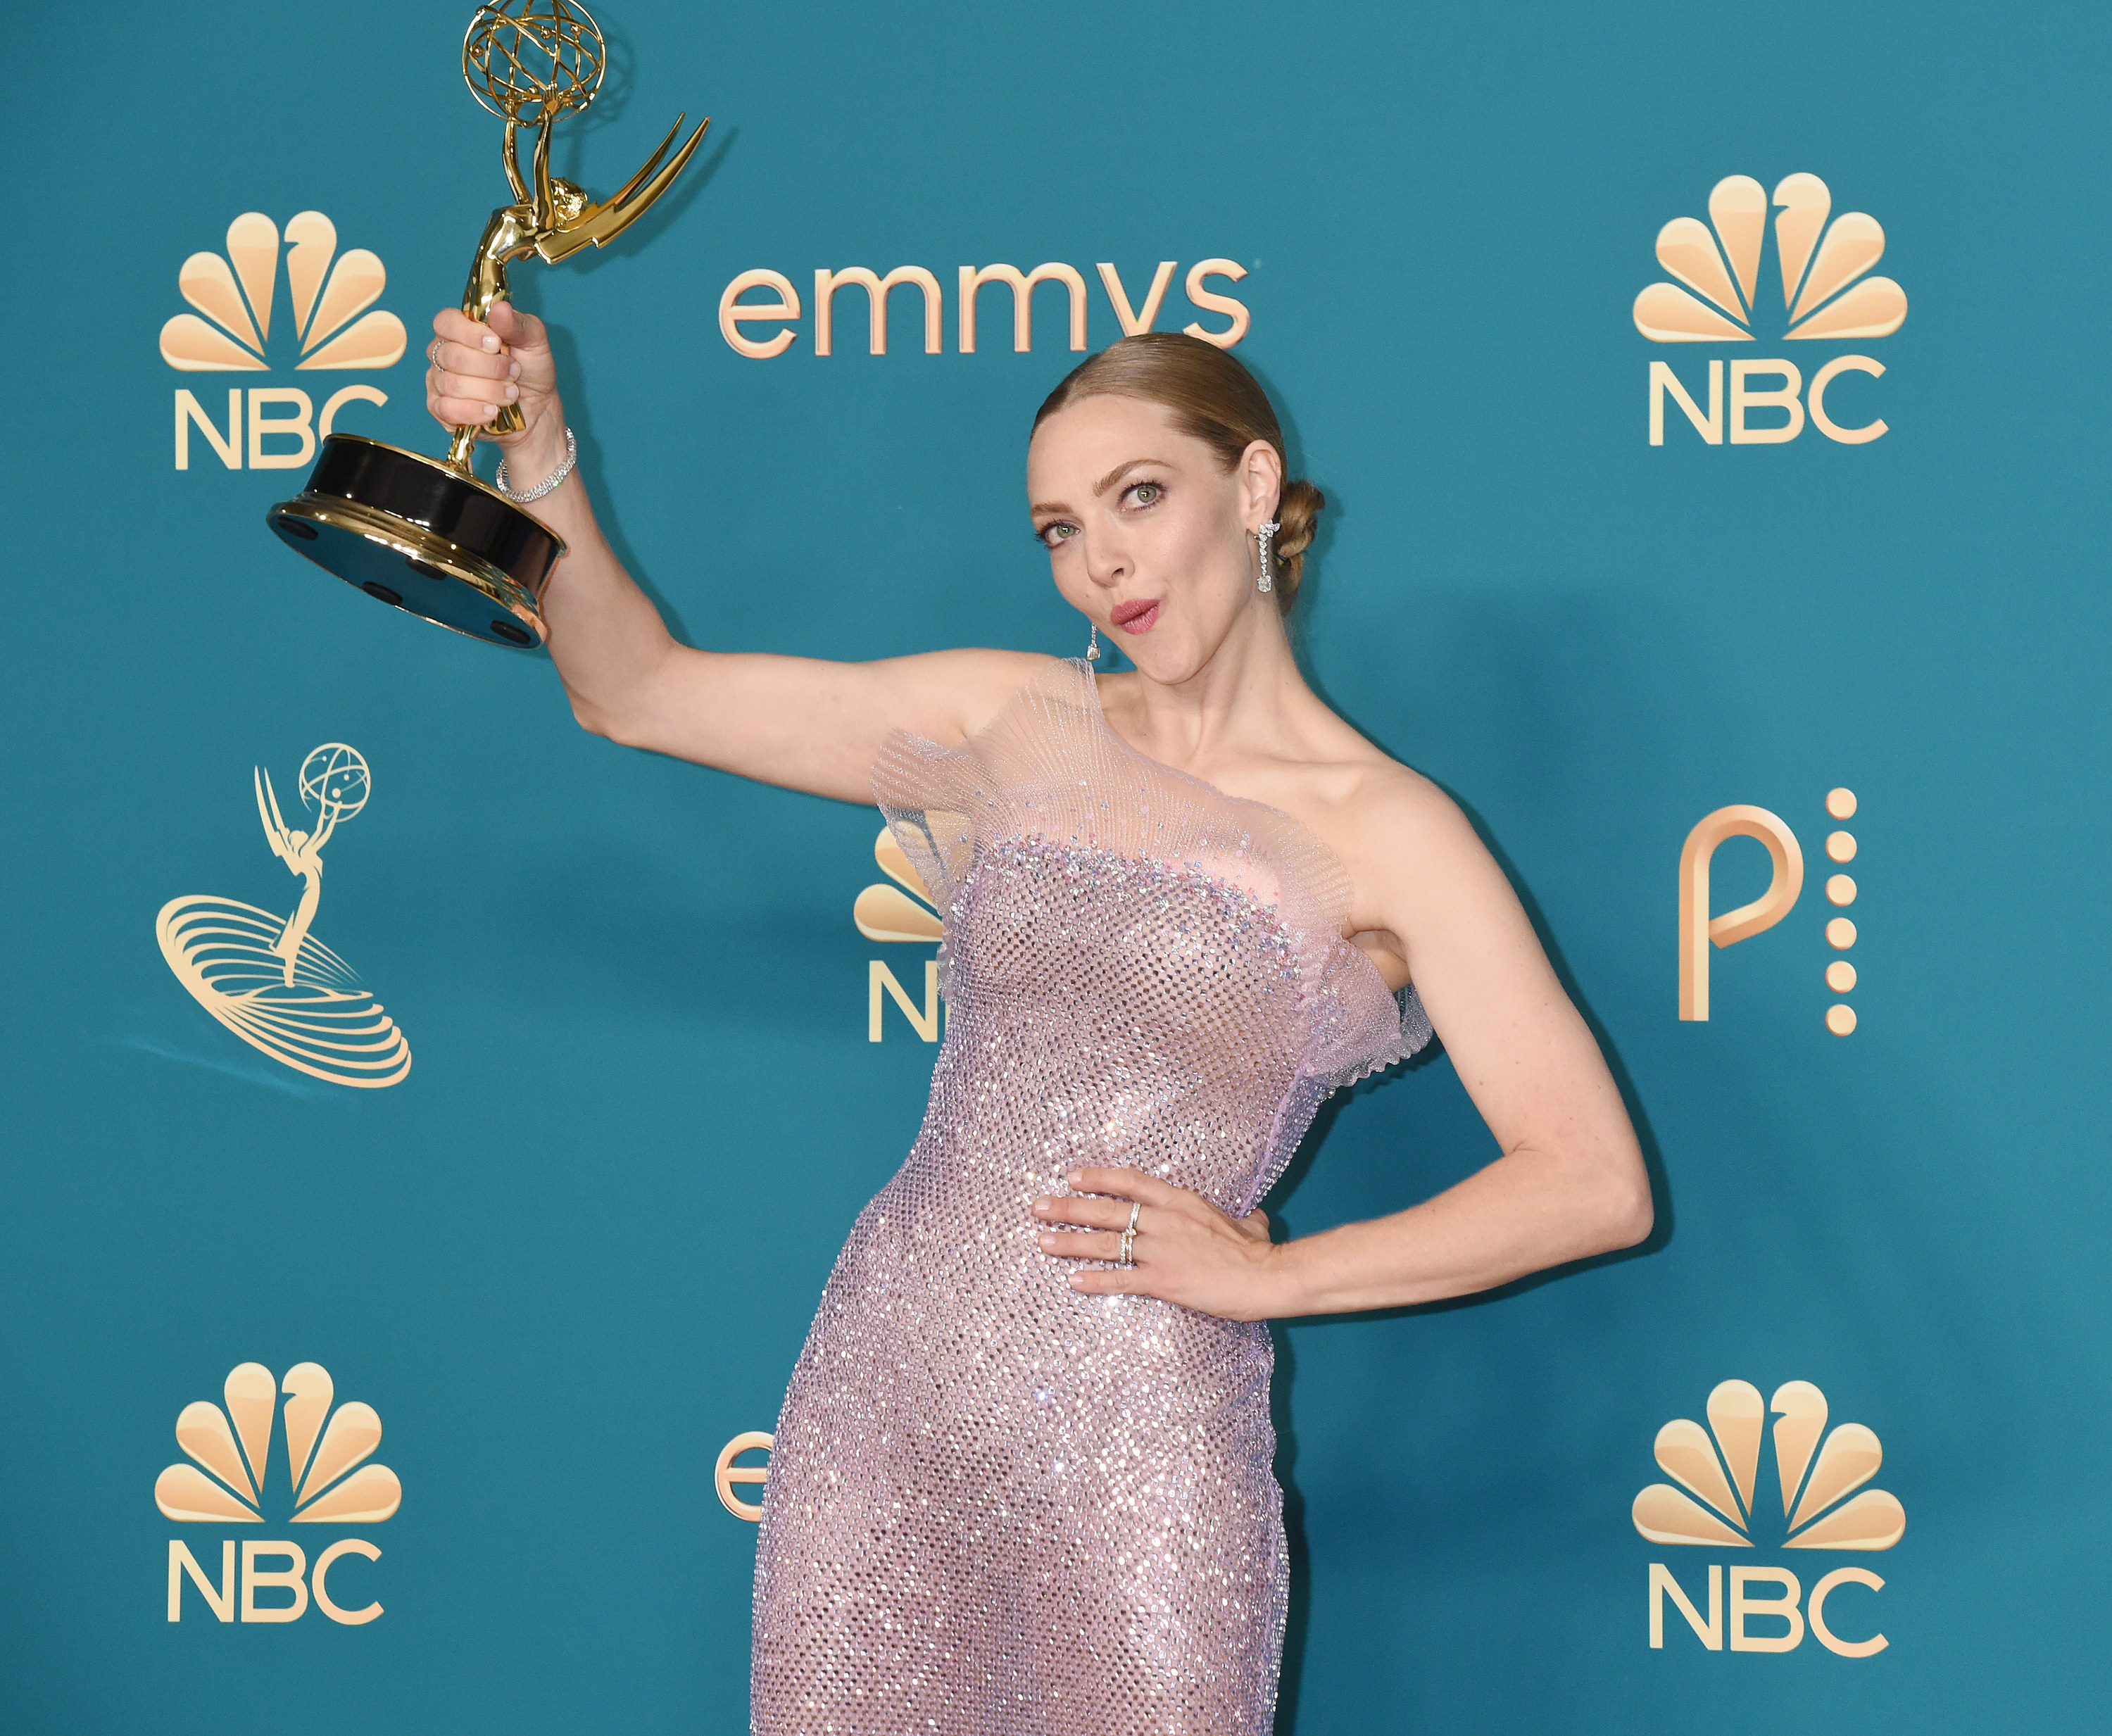 Amanda wearing a glittering sleeveless bodycon dress in a pale lilac color, holding her Emmy victoriously; her blonde hair is tied back in a bun and she wears silver drop earrings